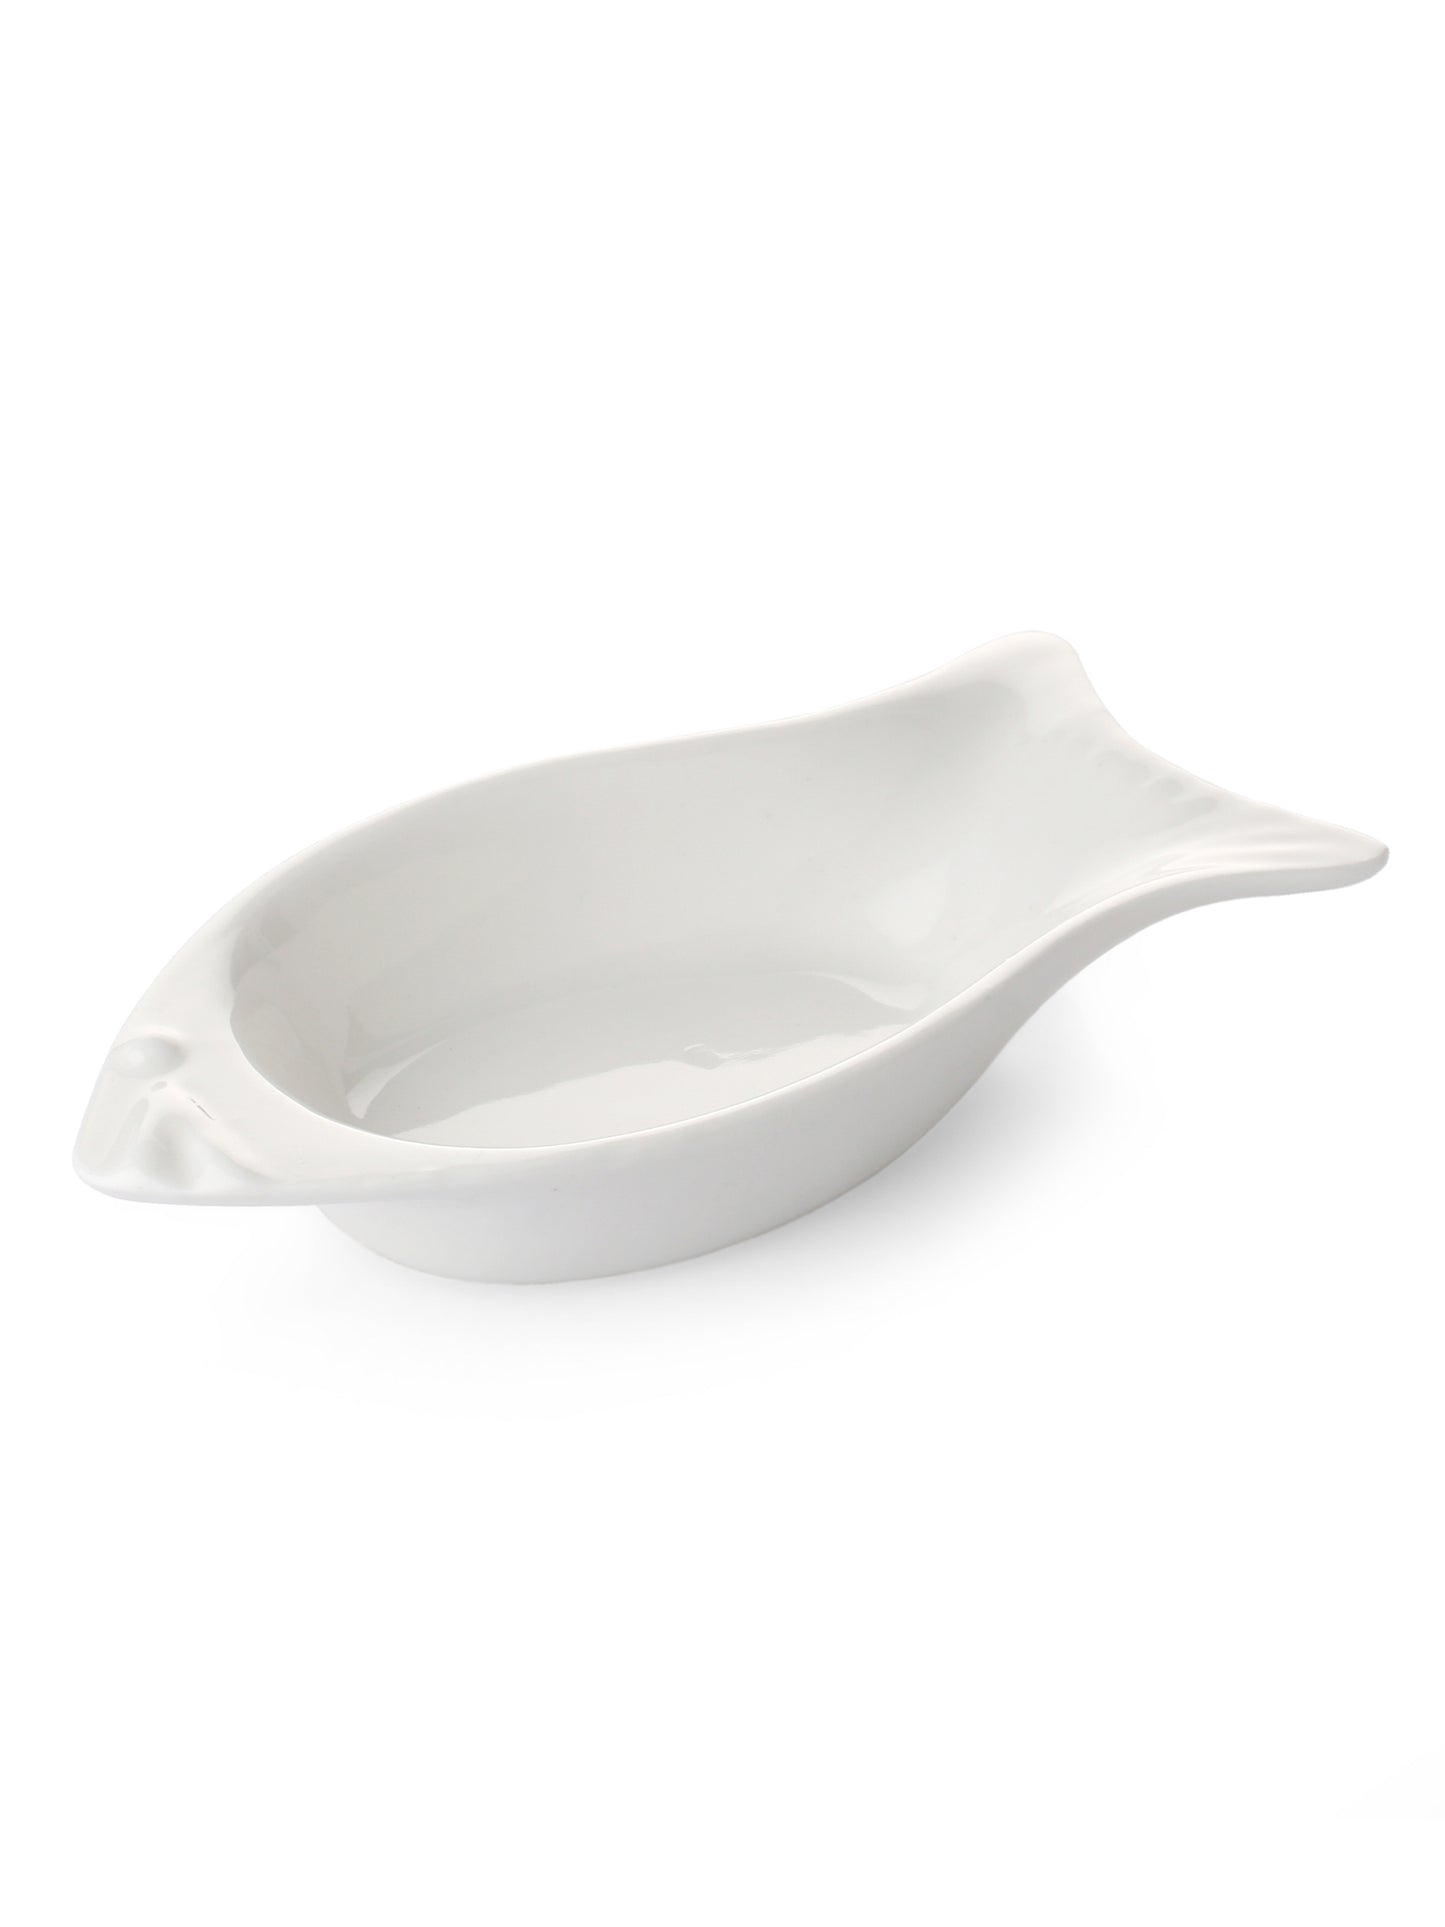 Clay Craft Fish Shaped Condiment/Dipping Bowls Set of 4 - 50 ml each